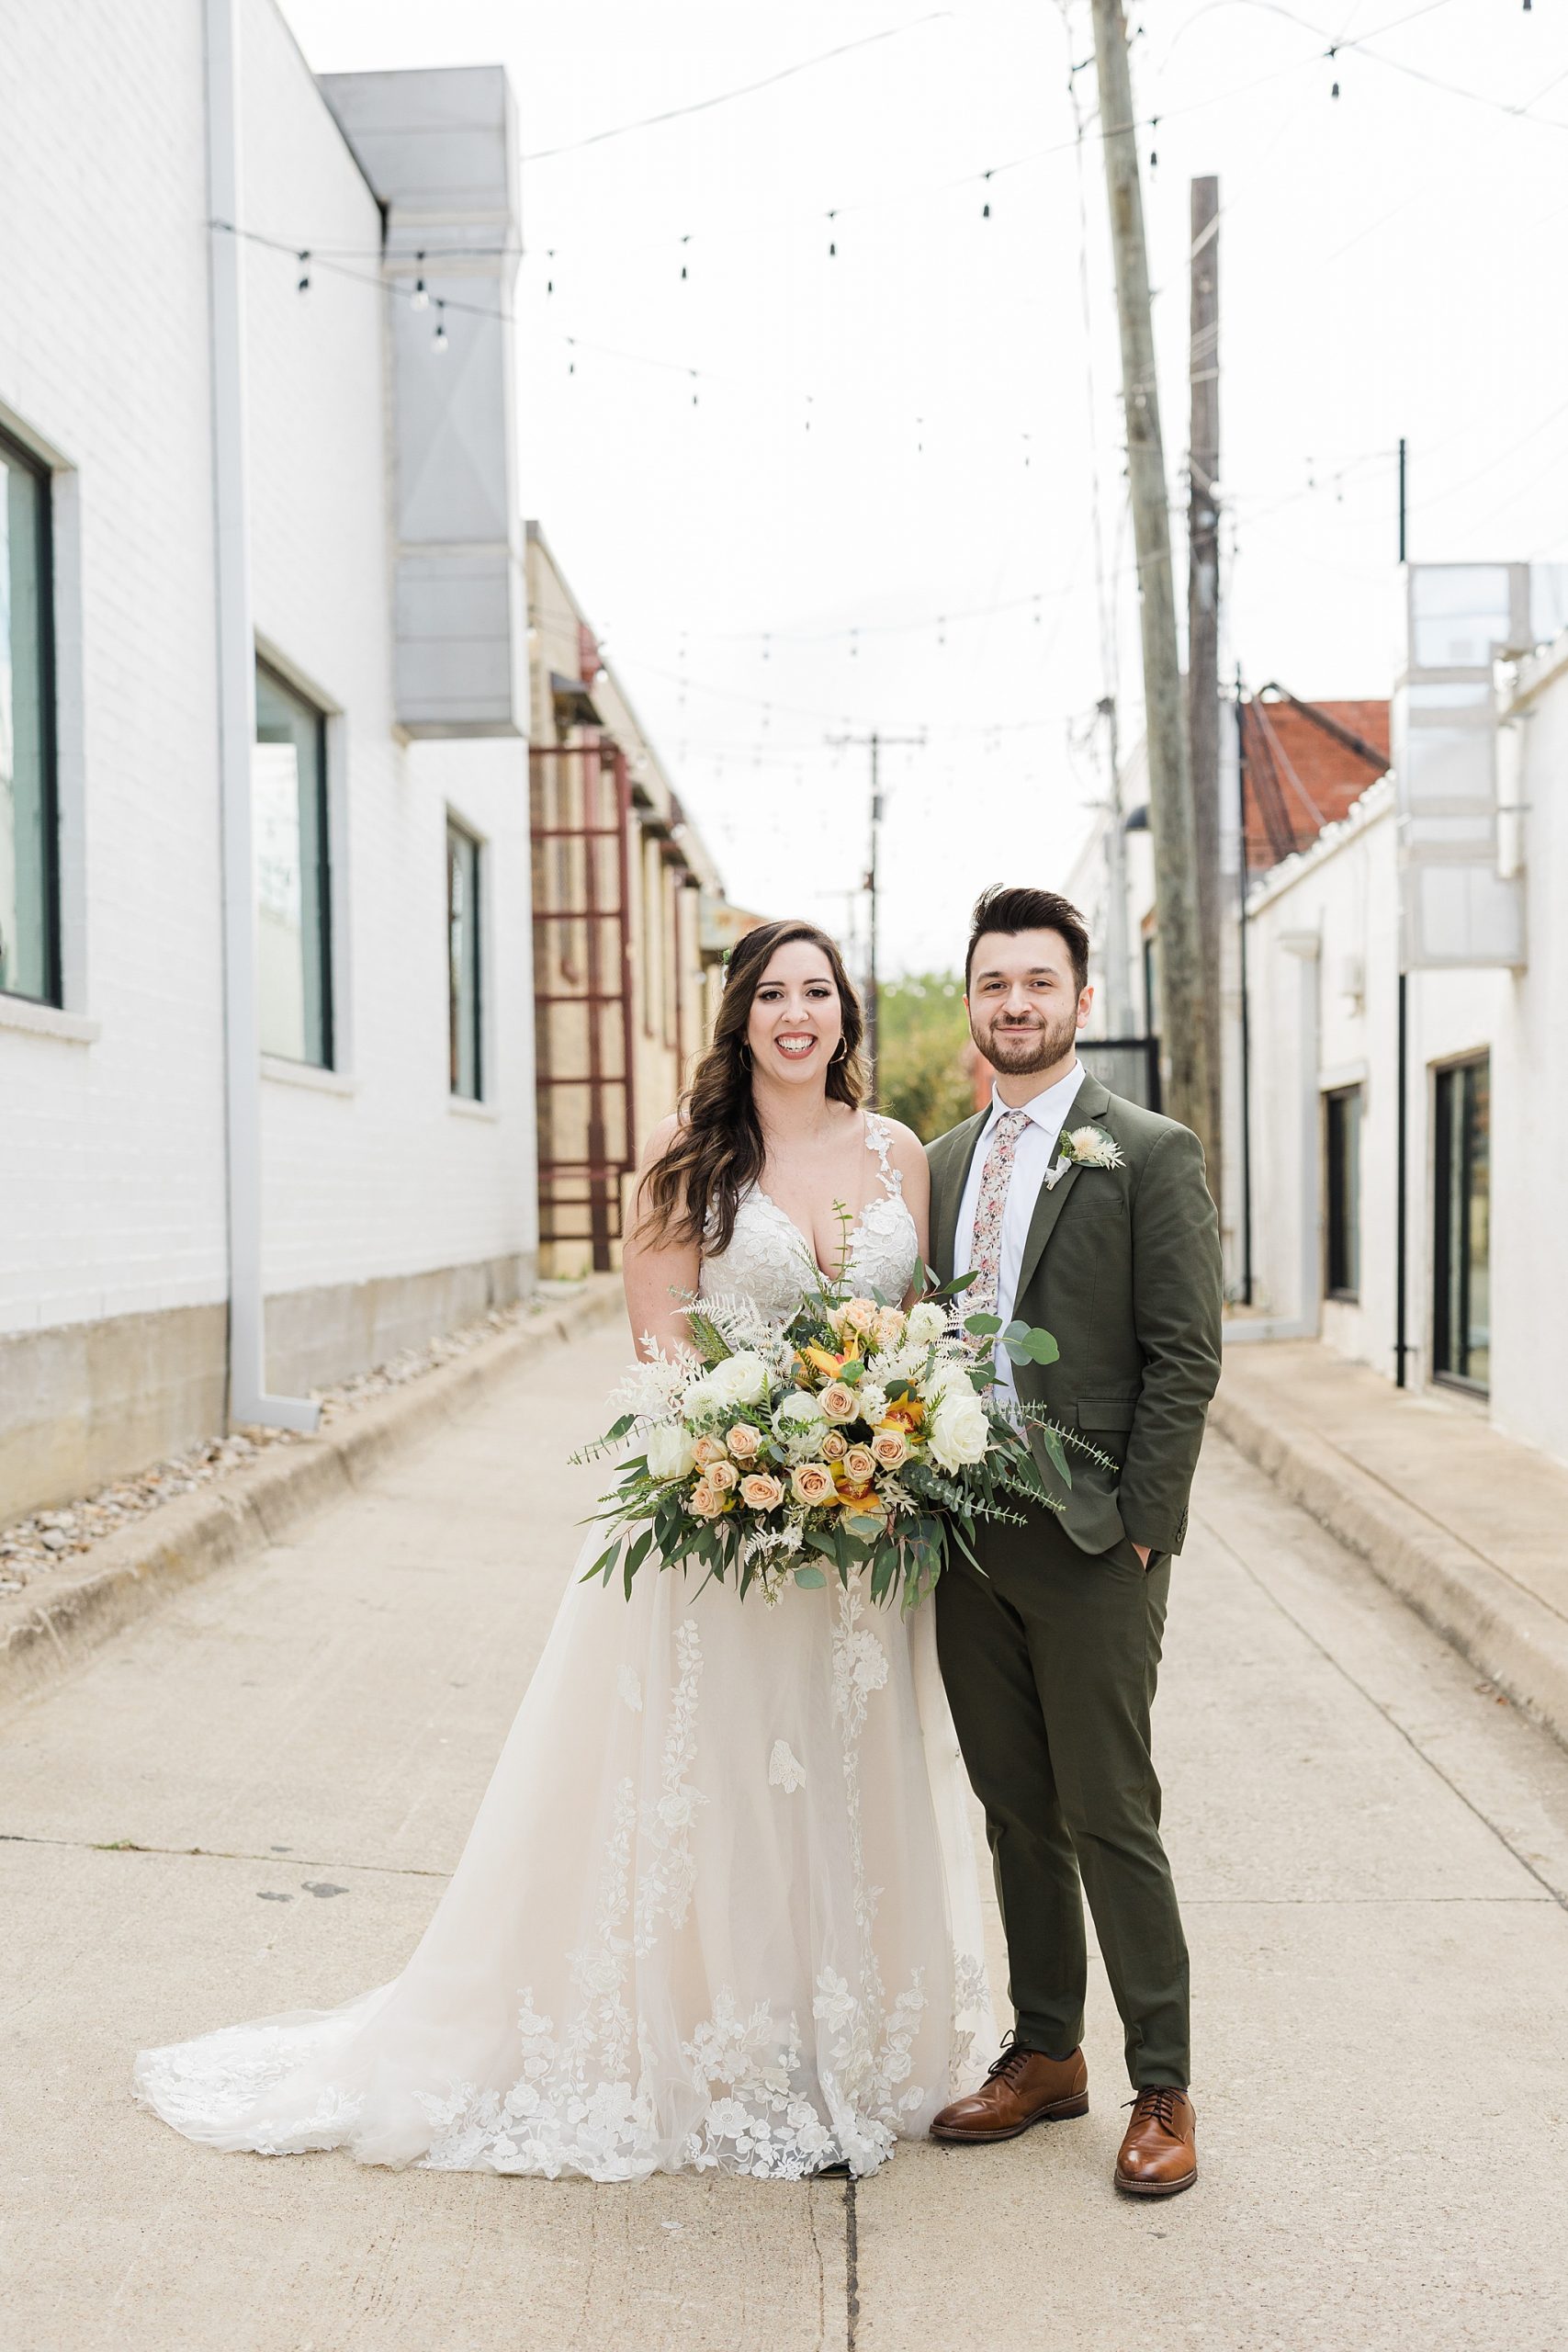 A bride and groom smiling and posing happily for a portrait before their wedding at The 4 Eleven in Fort Worth, Texas. The bride is wearing a decorative, floral, white wedding dress, green shoes, a floral headpiece, and is a holding a large bouquet of flowers. The groom is wearing a grey suit, white dress shirt, decorative floral tie, a boutonniere, and a watch.